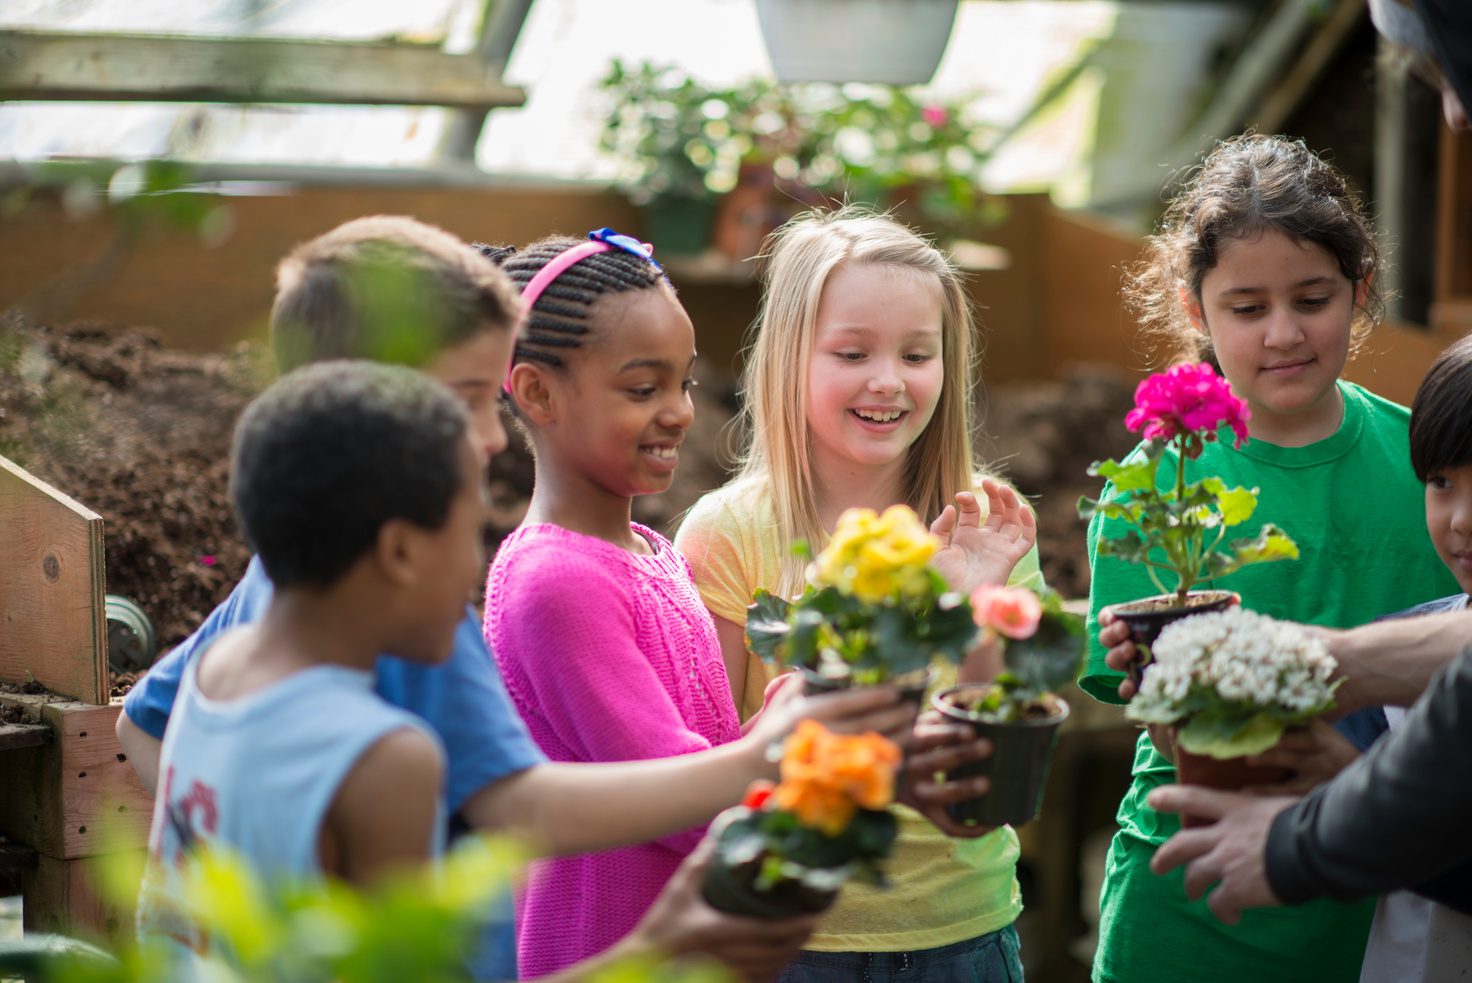 Children learning about plants in a greenhouse